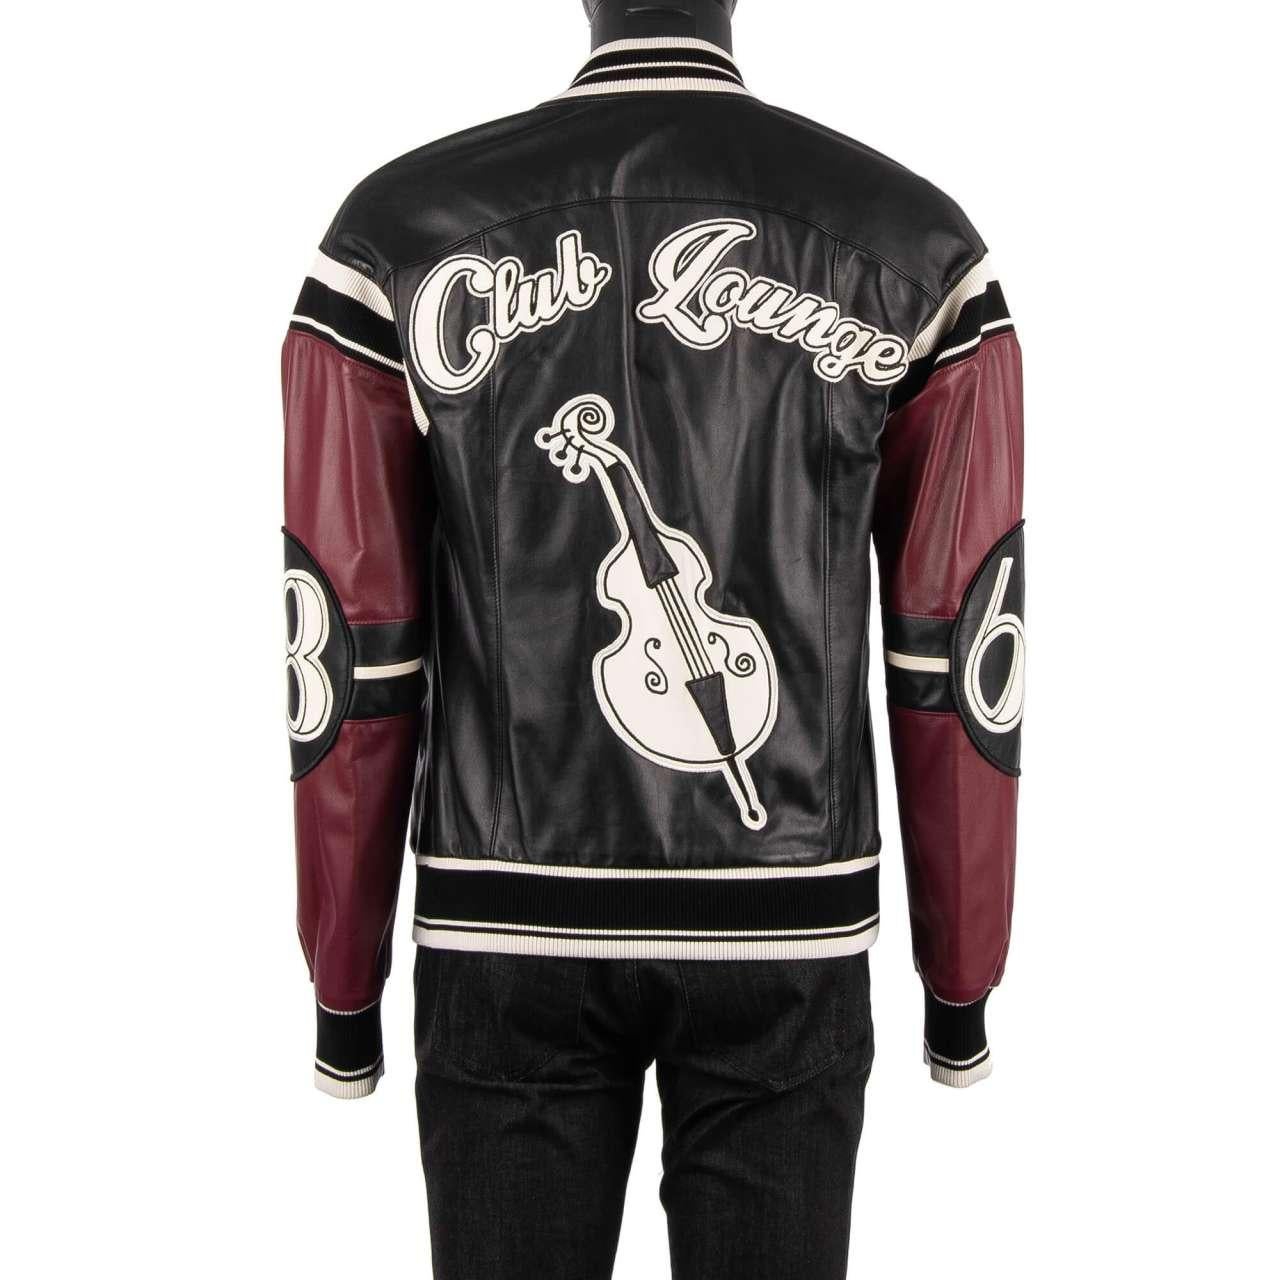 D&G Club Lounge Cello Embroidered Bomber Leather Jacket Black Bordeaux 44 In Excellent Condition For Sale In Erkrath, DE